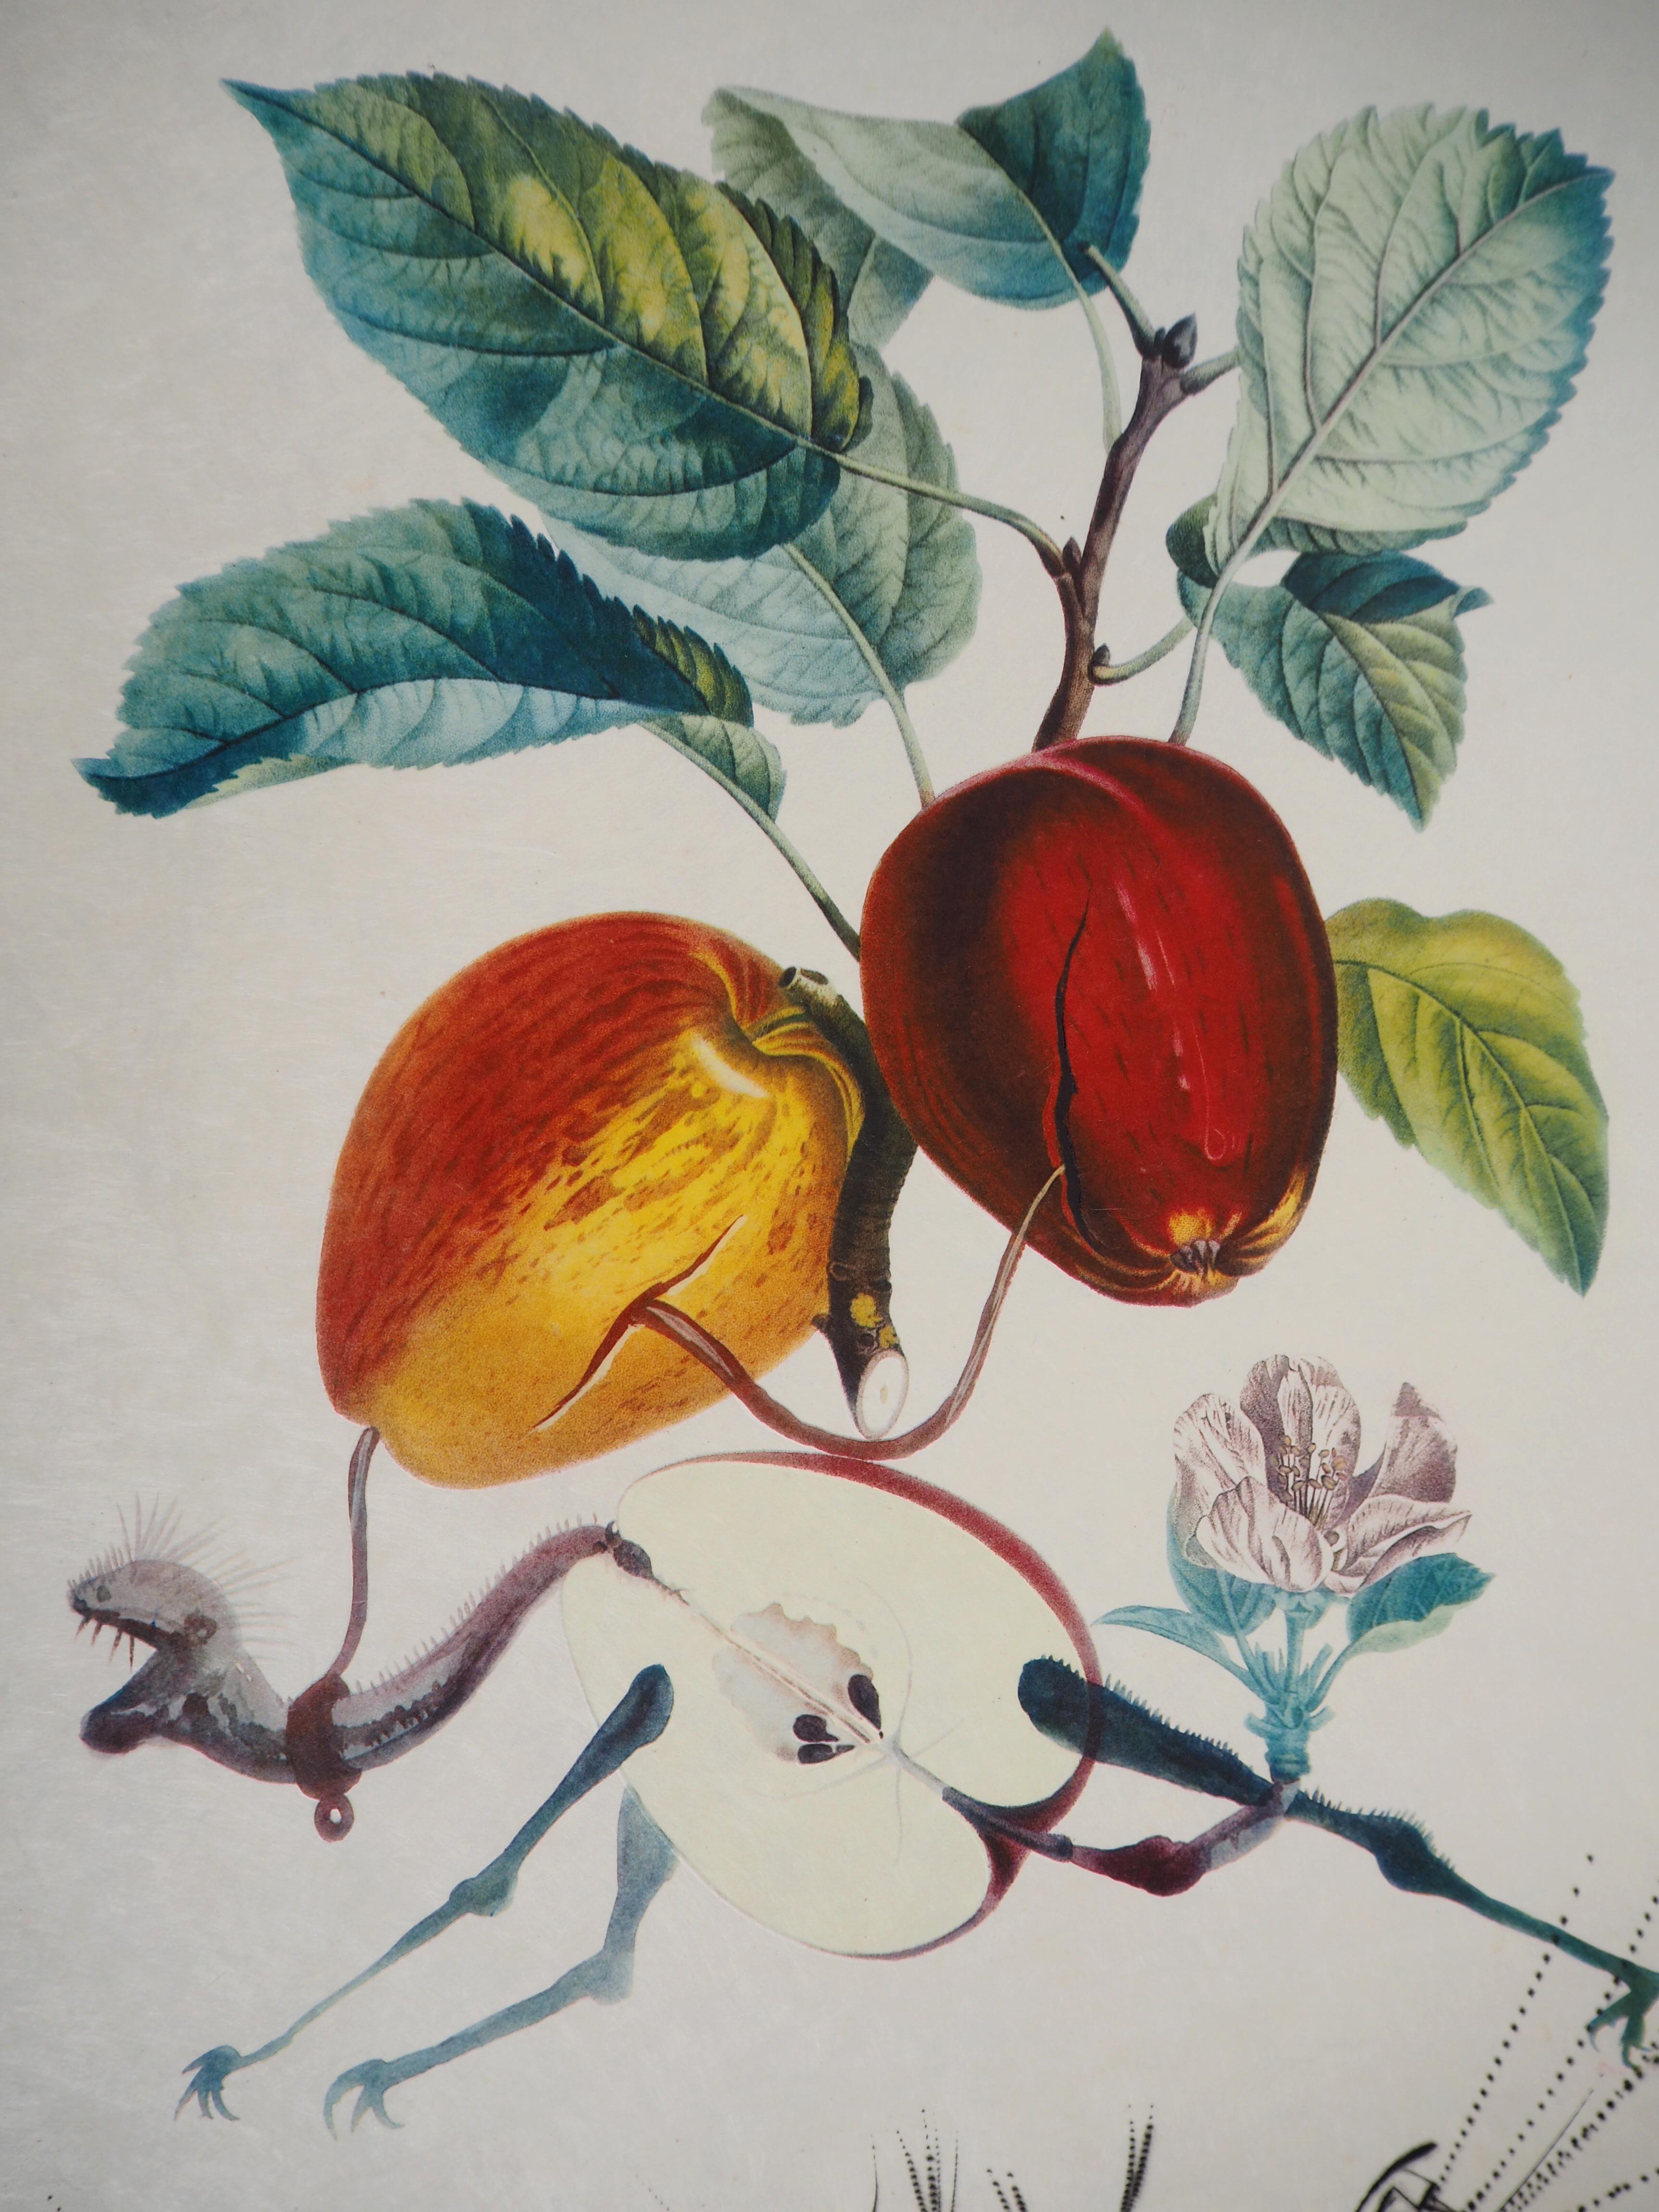 Salvador DALI
Flordali : Eve's Apple (The Fruits)

Original embossed Lithograph and Etching
Handsigned in pencil
Numbered /35 copies.
On Japan paper 77 x 56 cm (c. 31 x 22 inch)

INFORMATION : 
From the serie 'FlorDali' (The Fruits) printed by